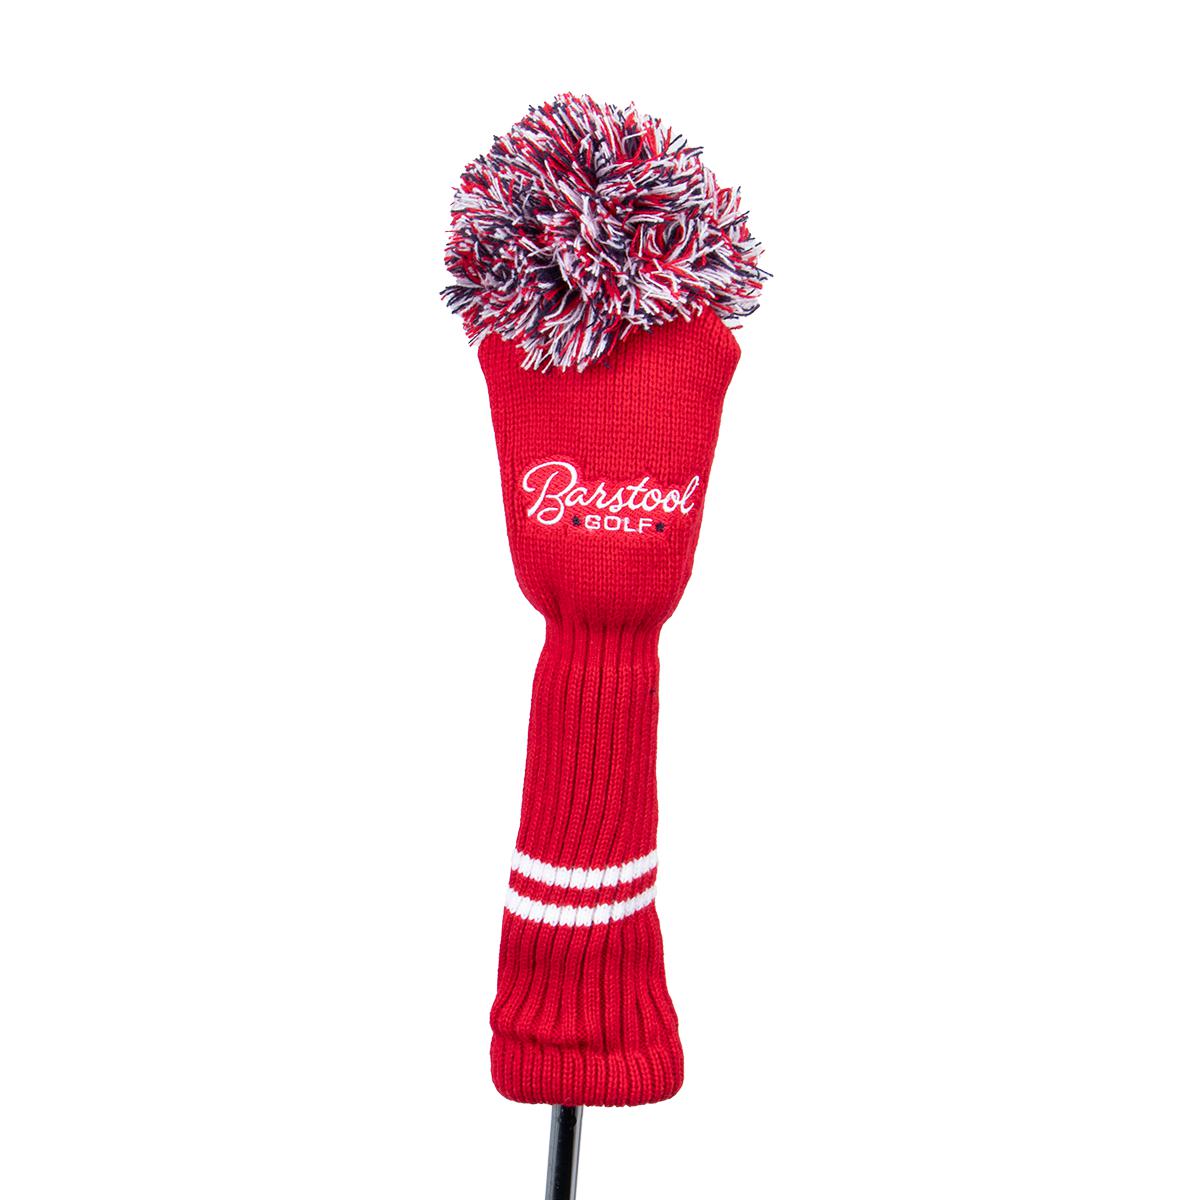 Barstool Golf Knit Driver Cover-Golf Accessories-Fore Play-One Size-Red-Barstool Sports